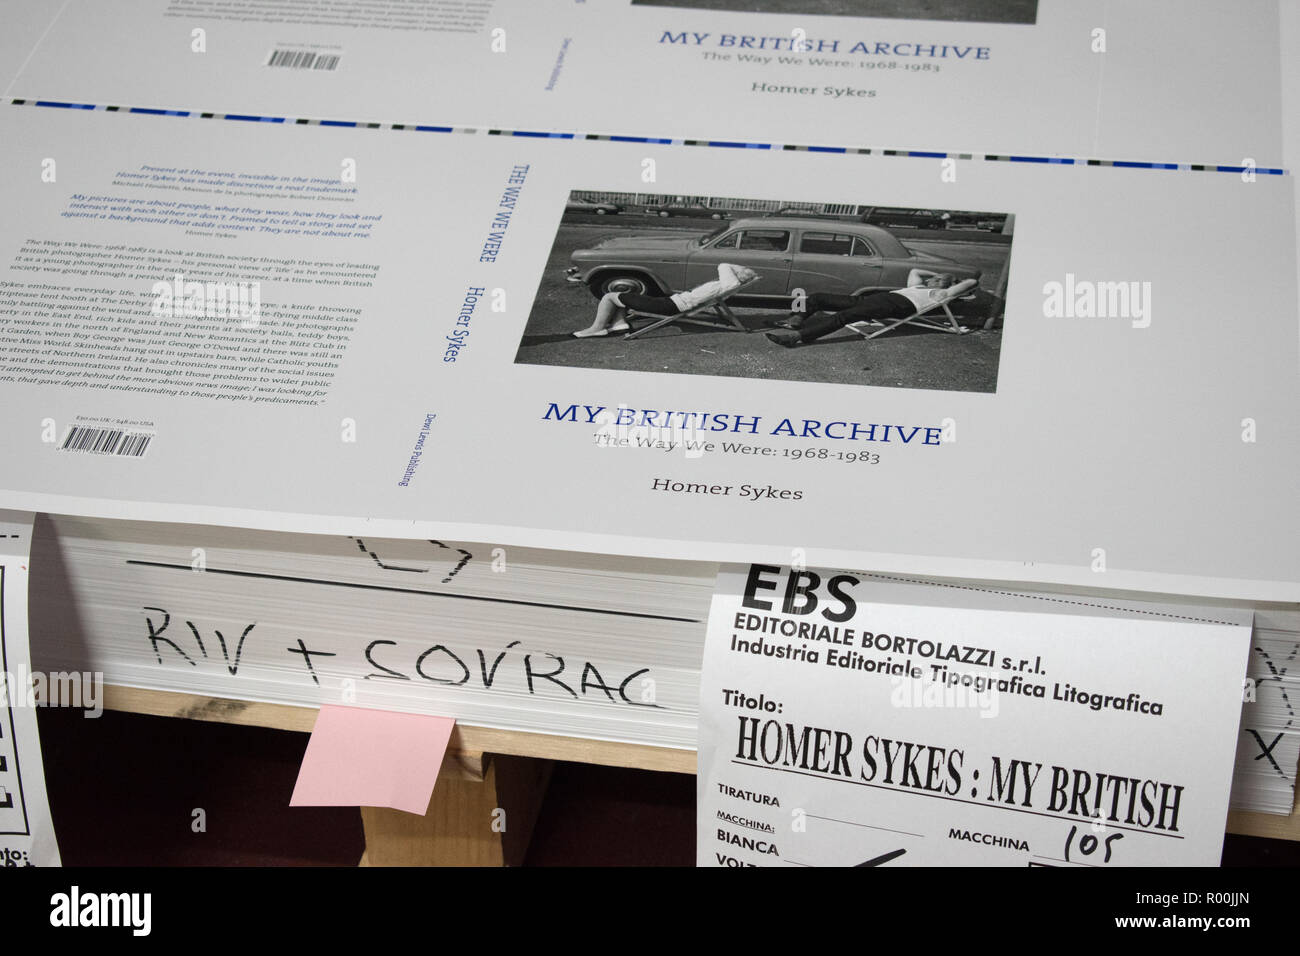 Photography book publishing, page proofs just off the press of My British Archive, The Way We Were 1968-1983 published by Dewi Lewis Publishing at EBS Verona Italy. 2018 HOMER SYKES Stock Photo